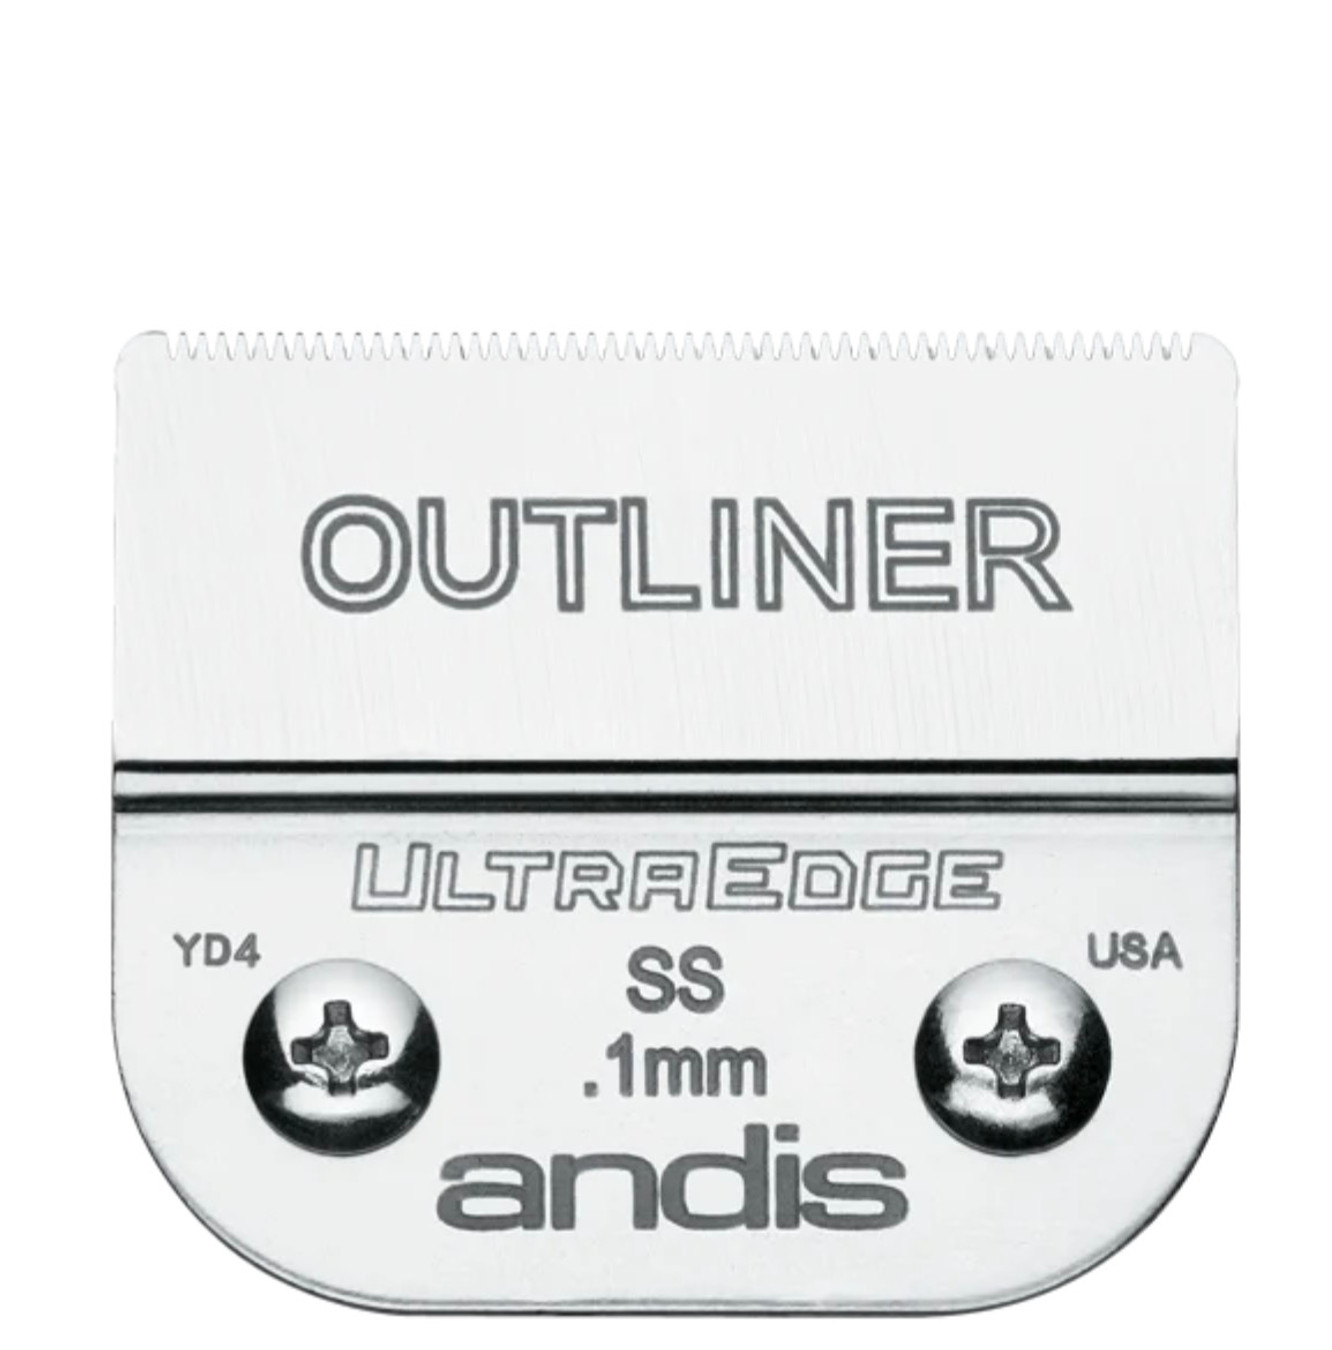 Andis UltraEdge Detachable Outliner Blade, Size 1/150